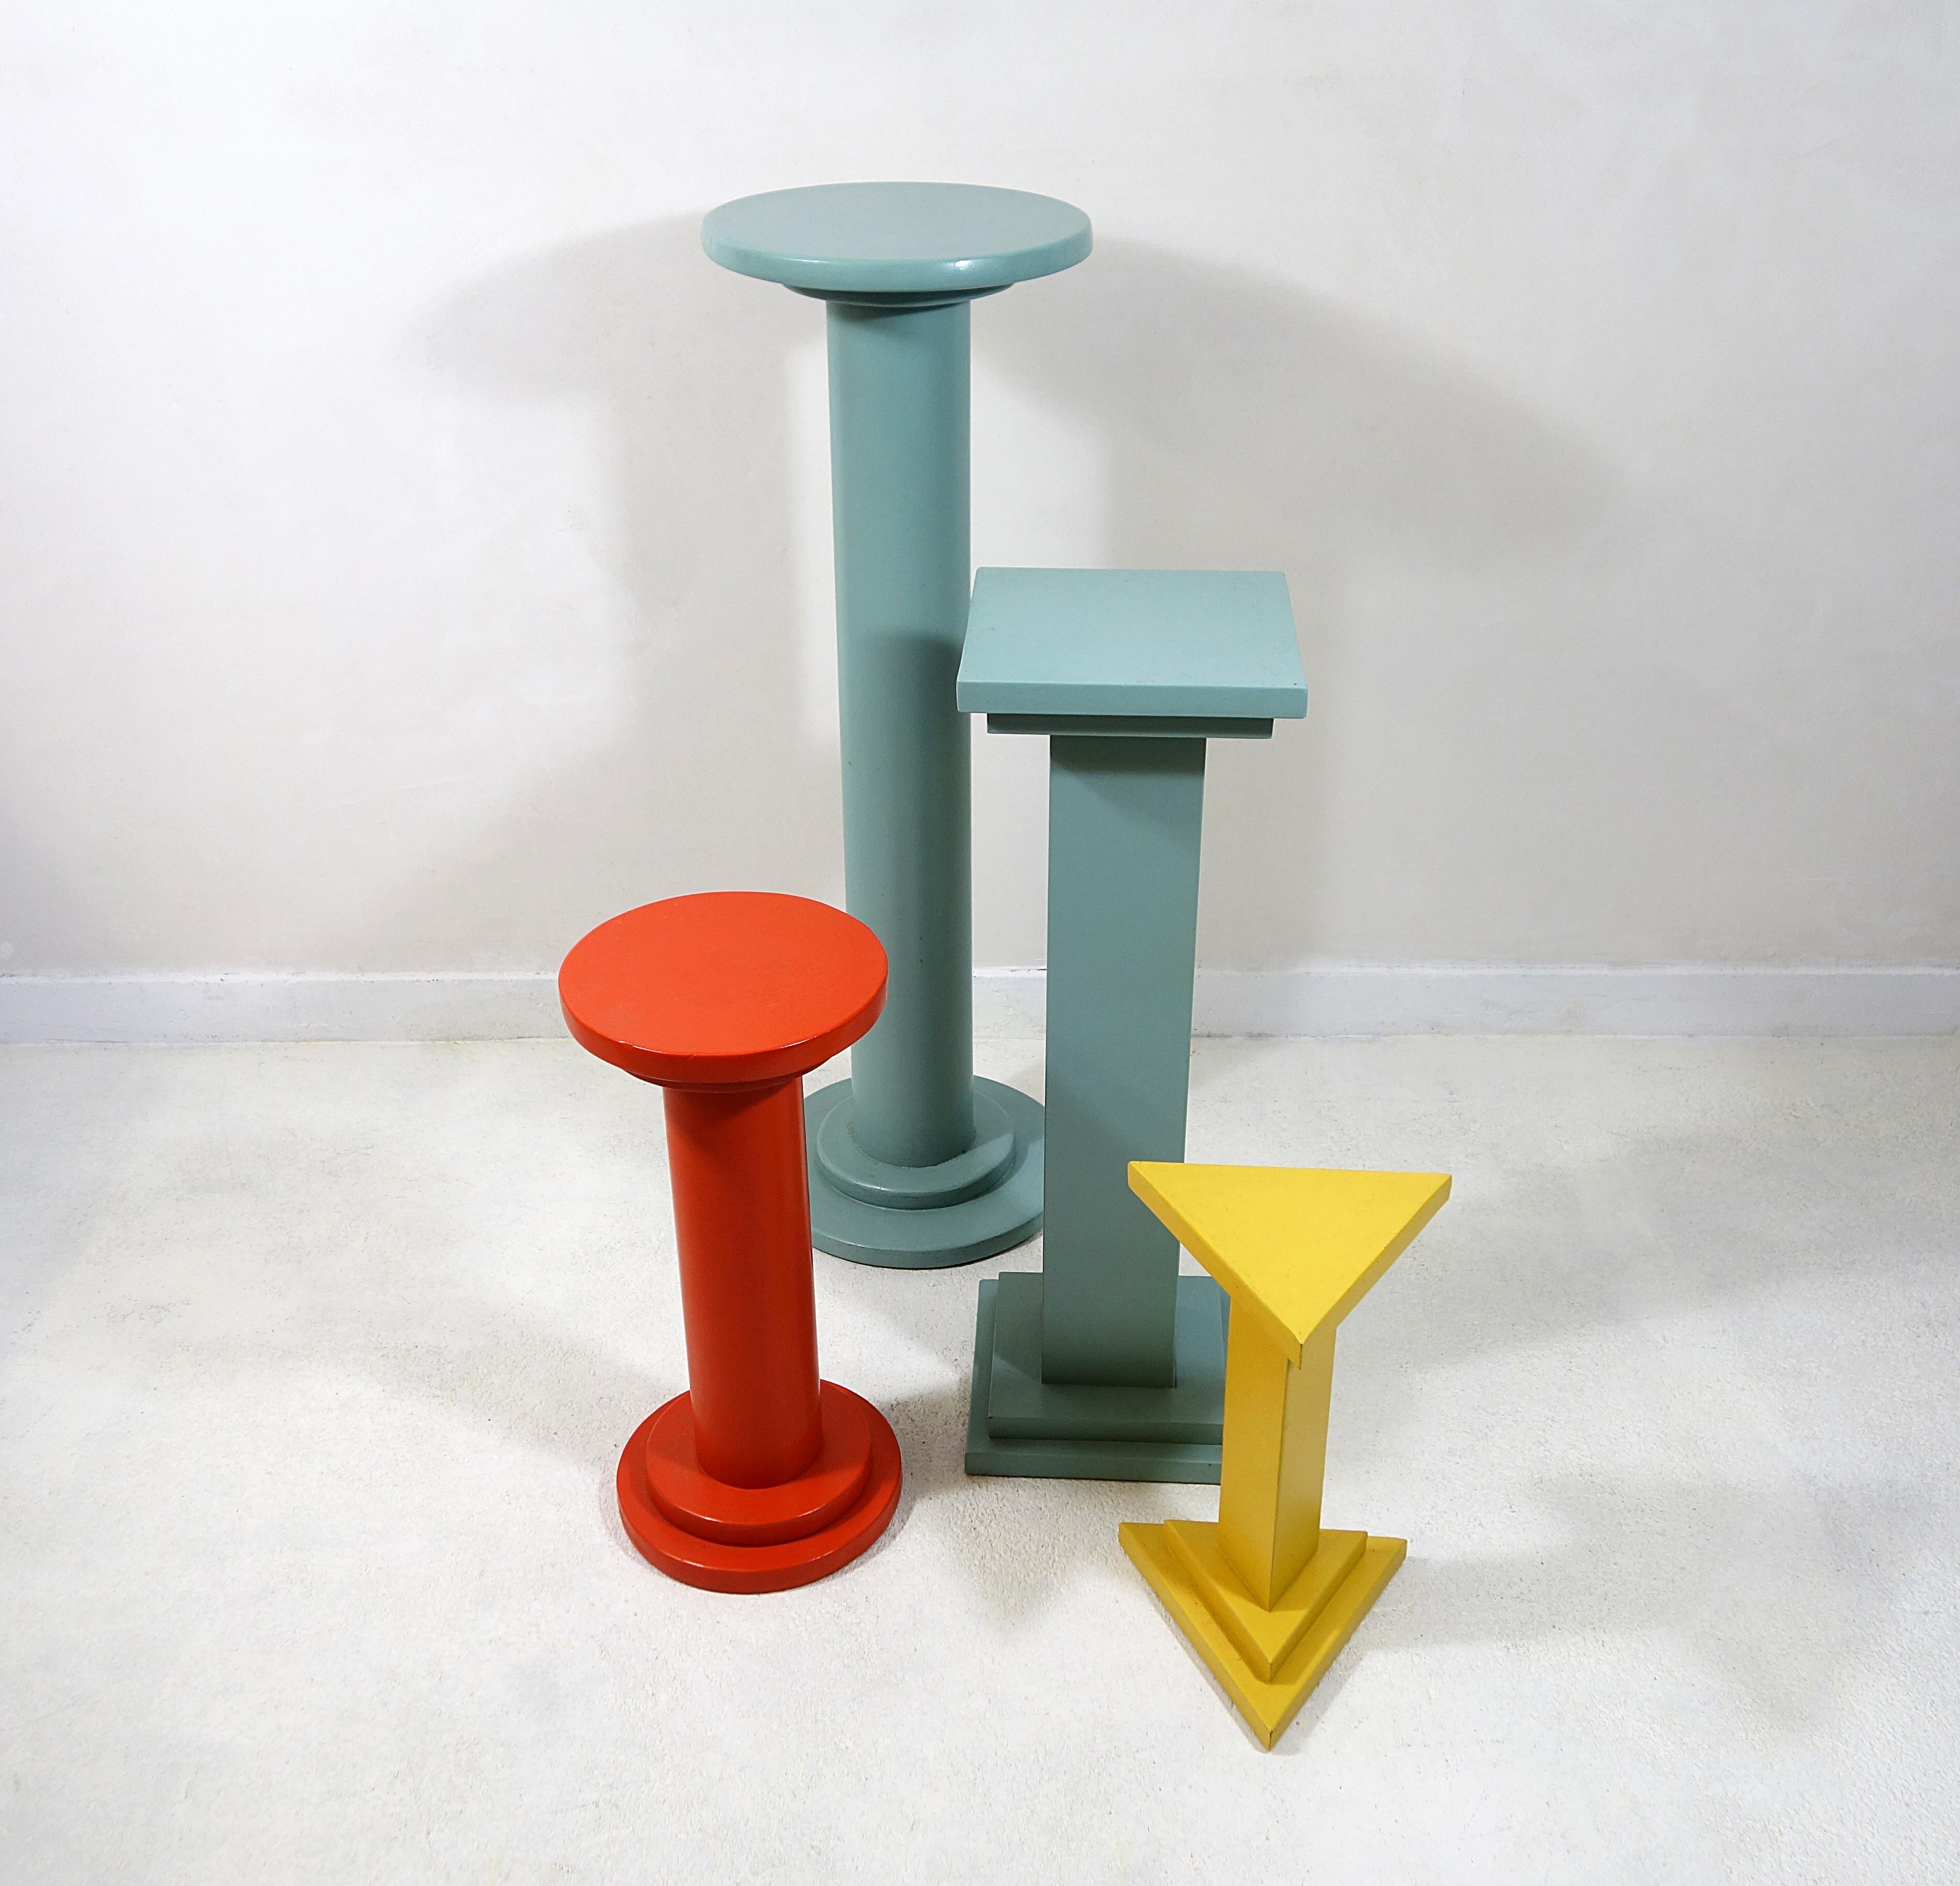 Dutch Set of 4 Art Deco Style Wooden Pedestals or Plant Stands in 1930s Colors